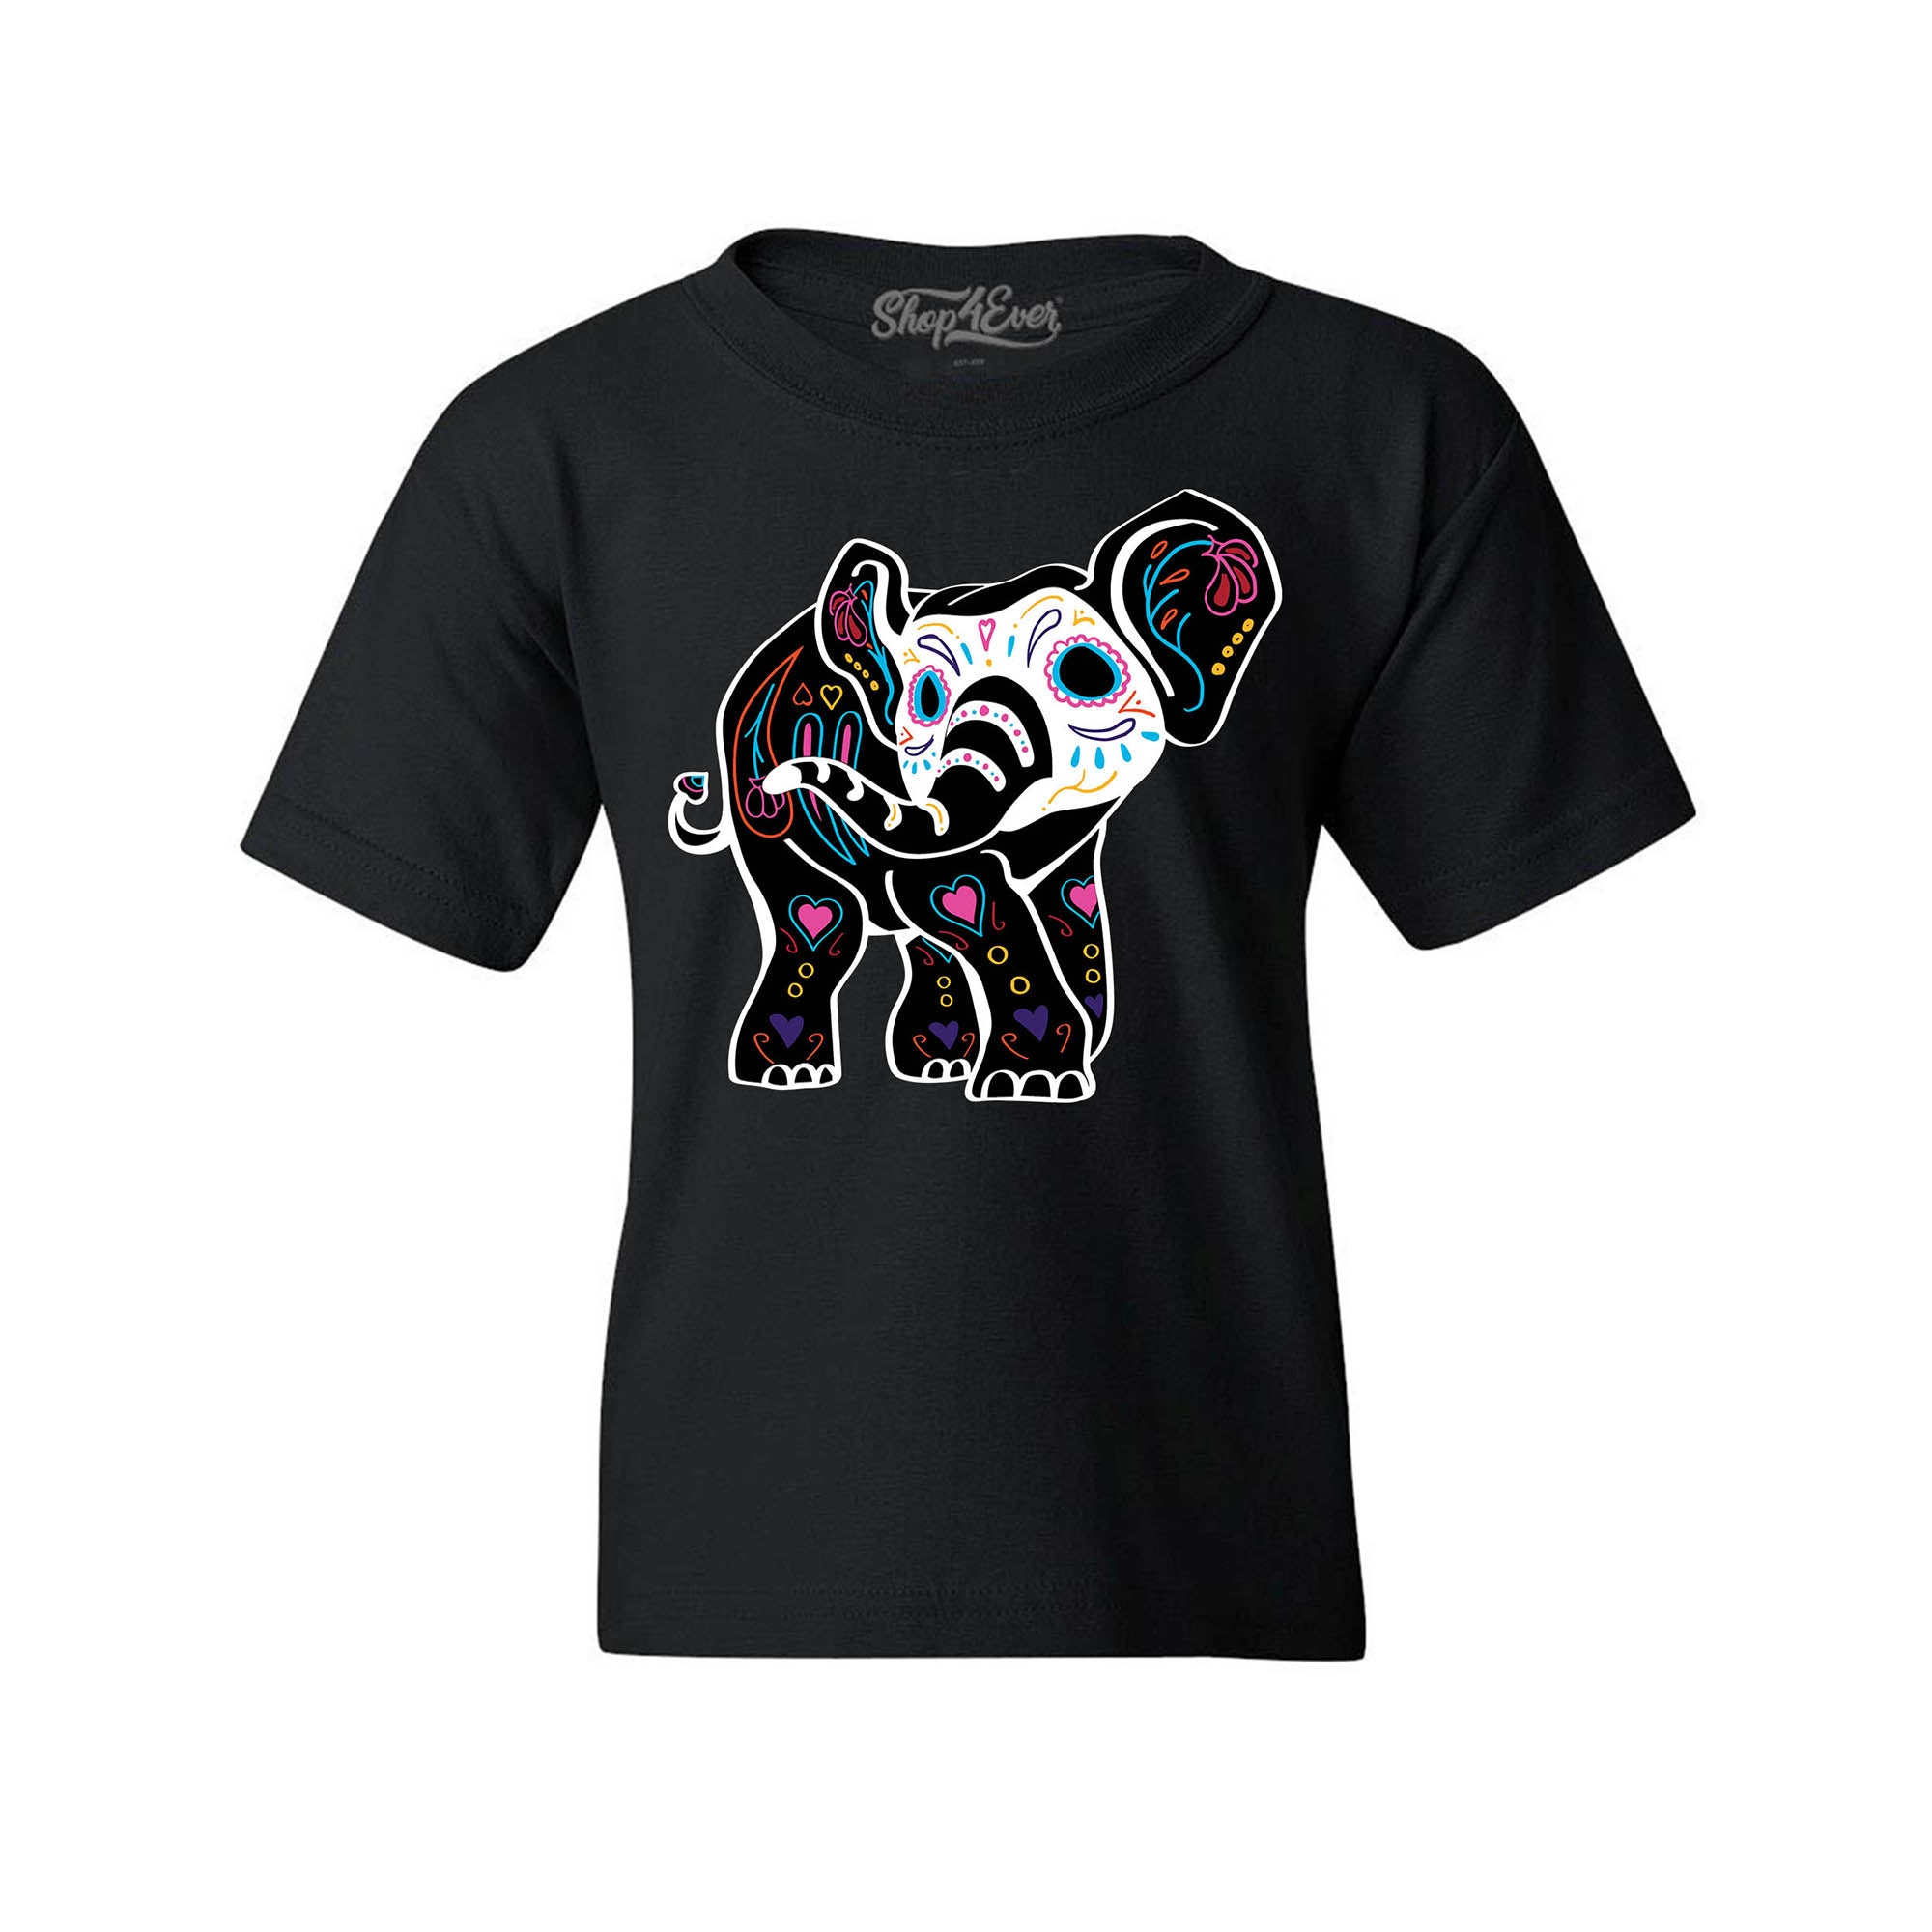 Day of The Dead Skull Child's Tee Sugar Elephant Youth's T-Shirt